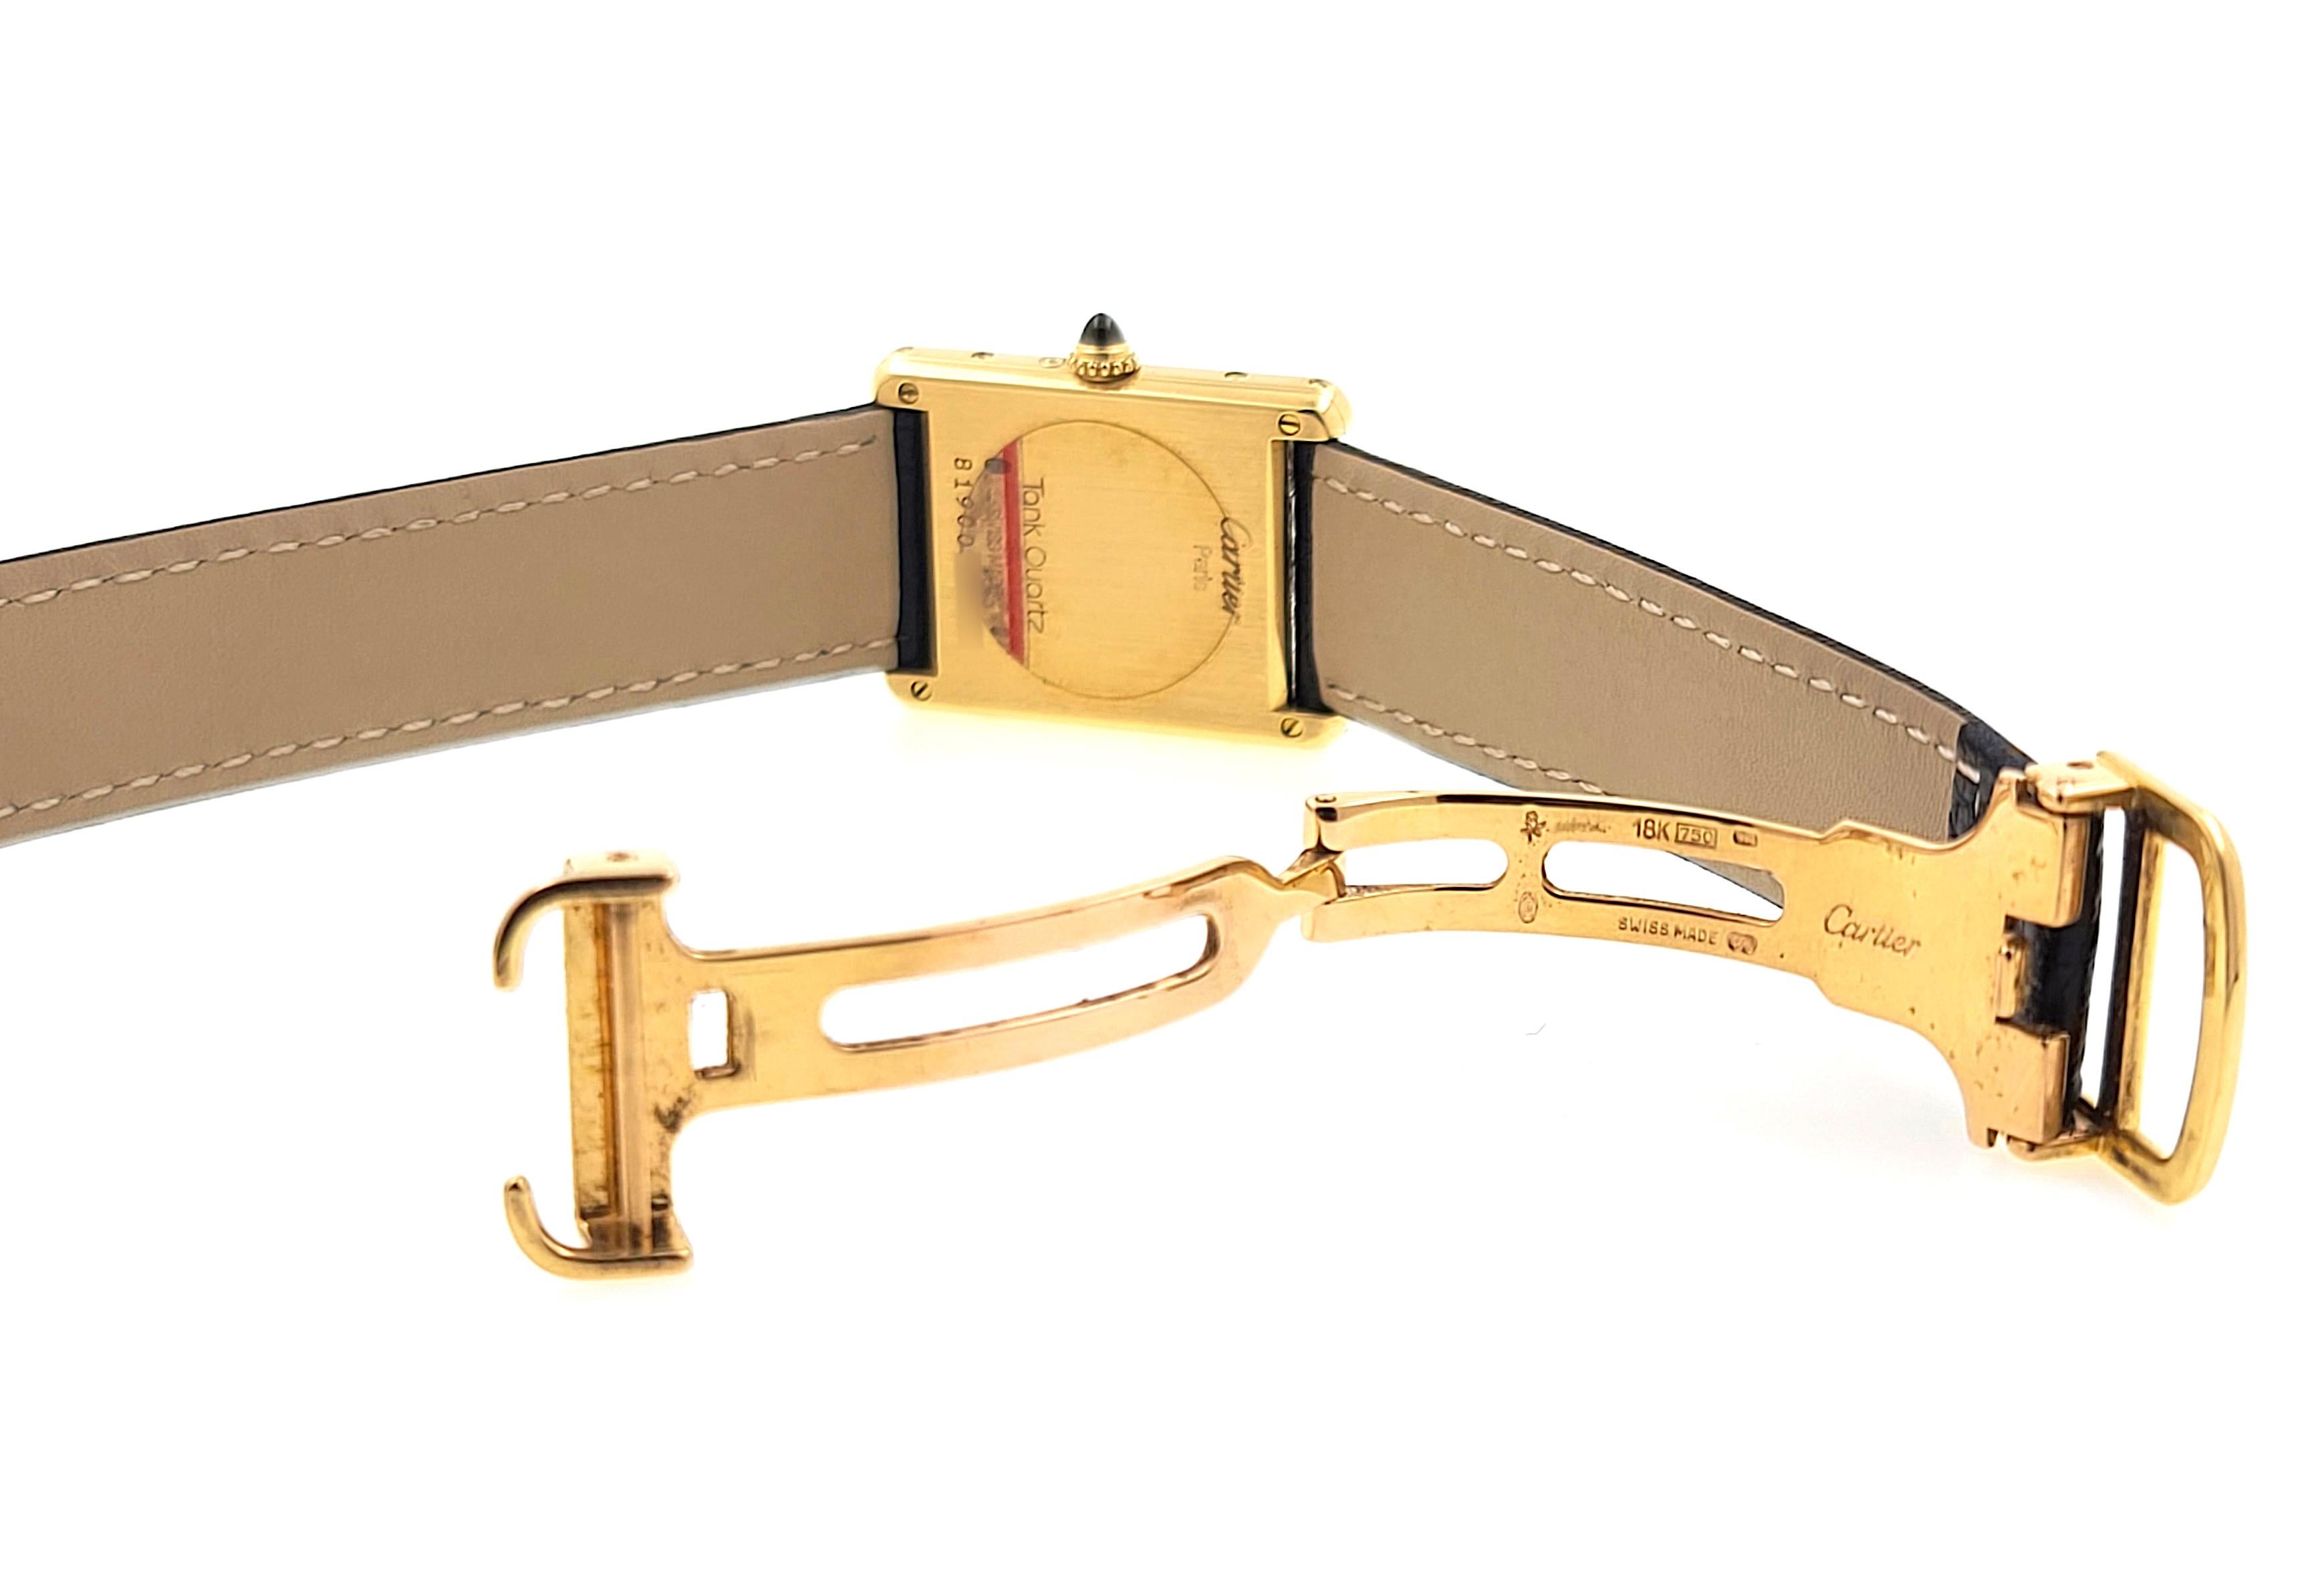 Cartier Tank Louis Moonphase Date FULL SET 819001 Large 18k Gold + Folding Clasp 2